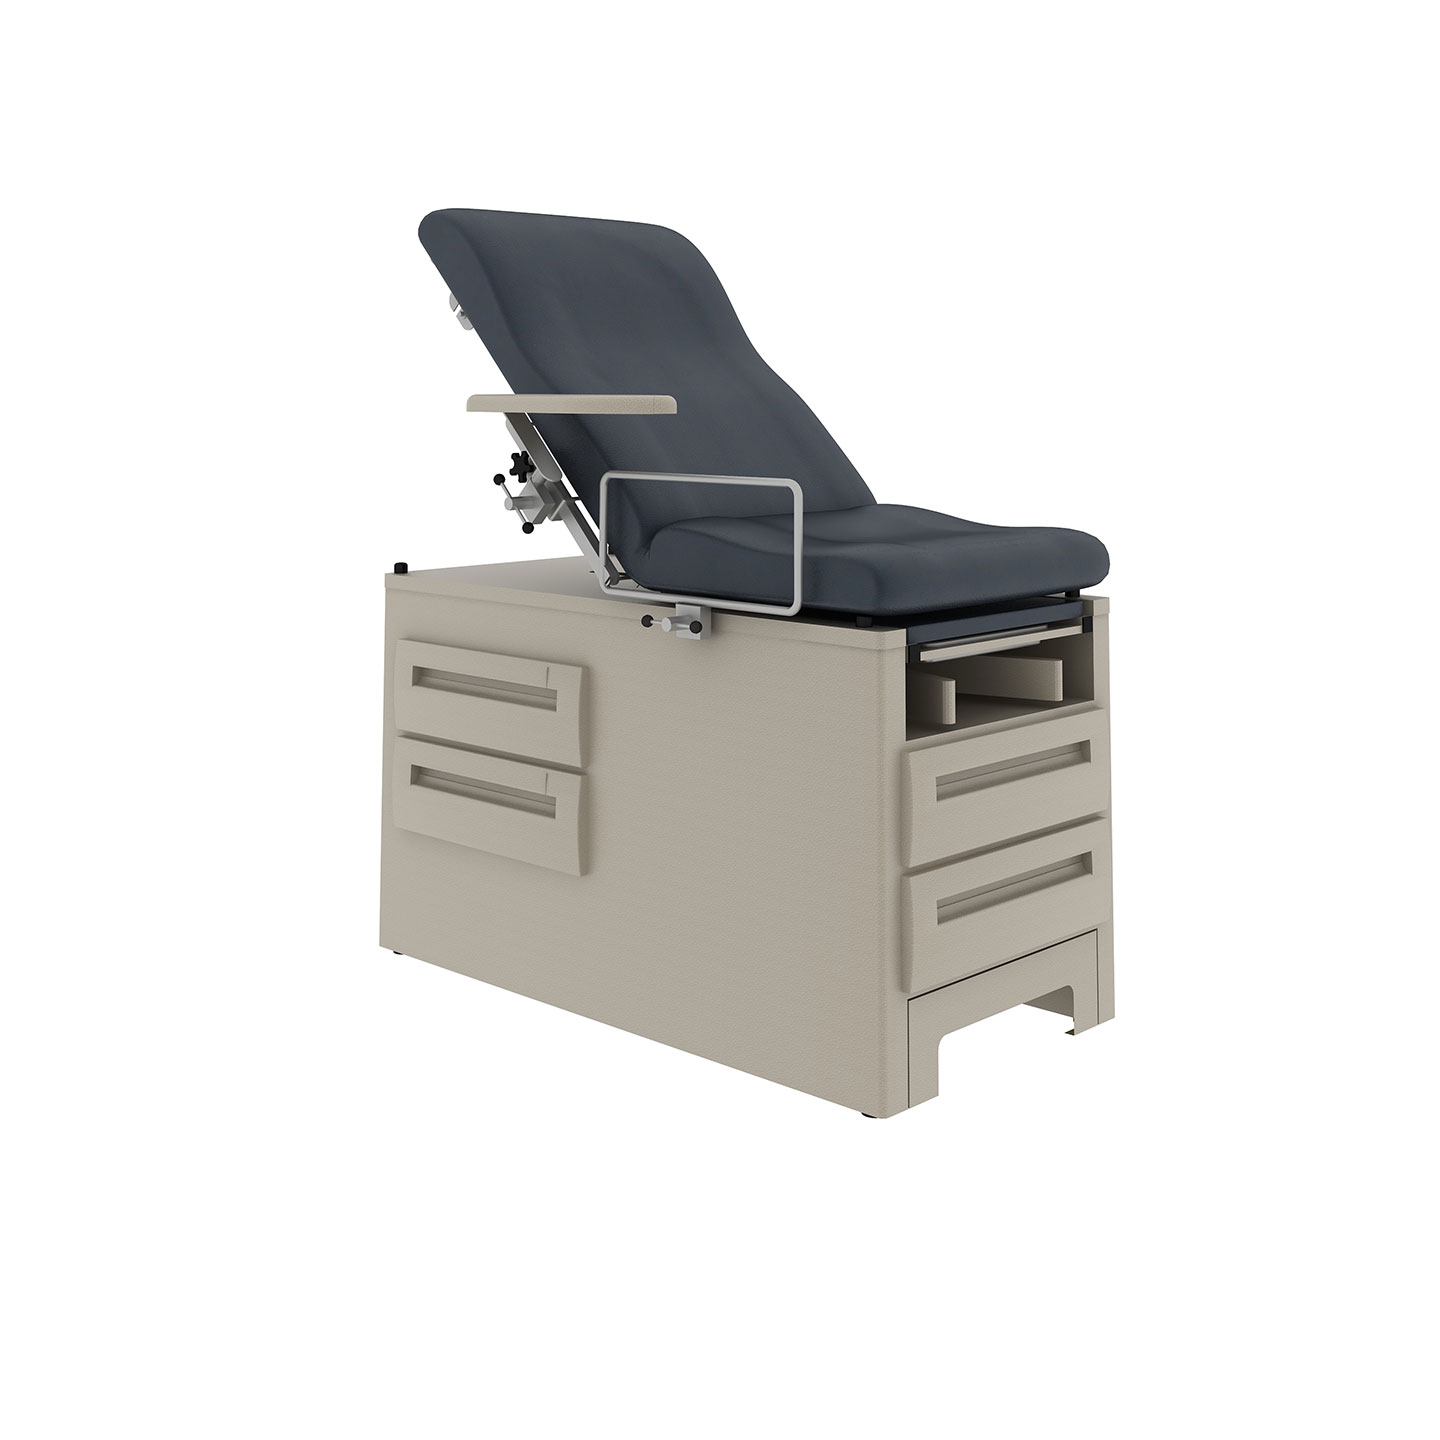 Haworth Exam Table with drawers in base and manual foldable seat